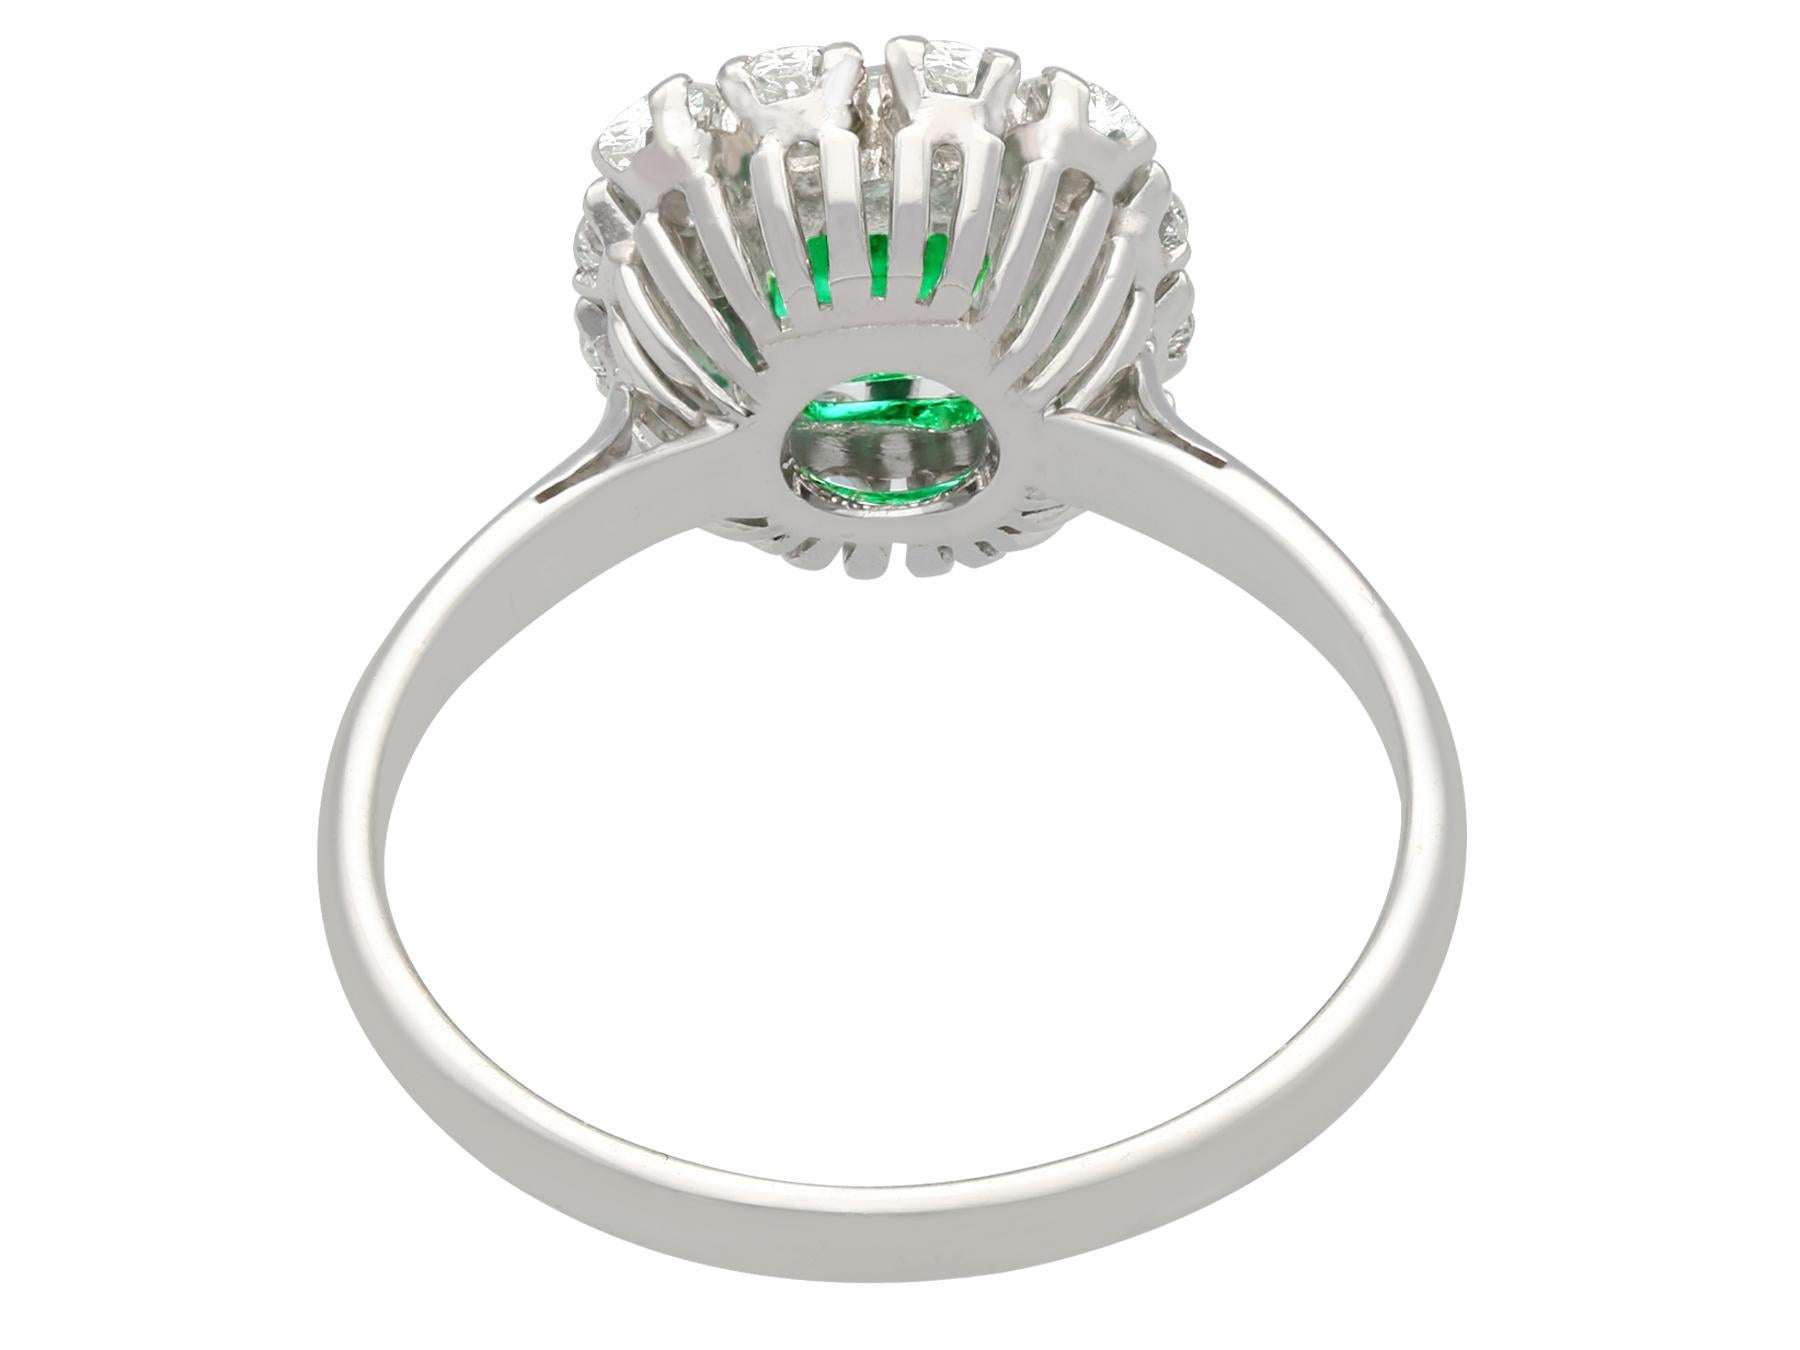 1980s 1.33 Carat Emerald and Diamond Gold Cluster Ring In Excellent Condition For Sale In Jesmond, Newcastle Upon Tyne